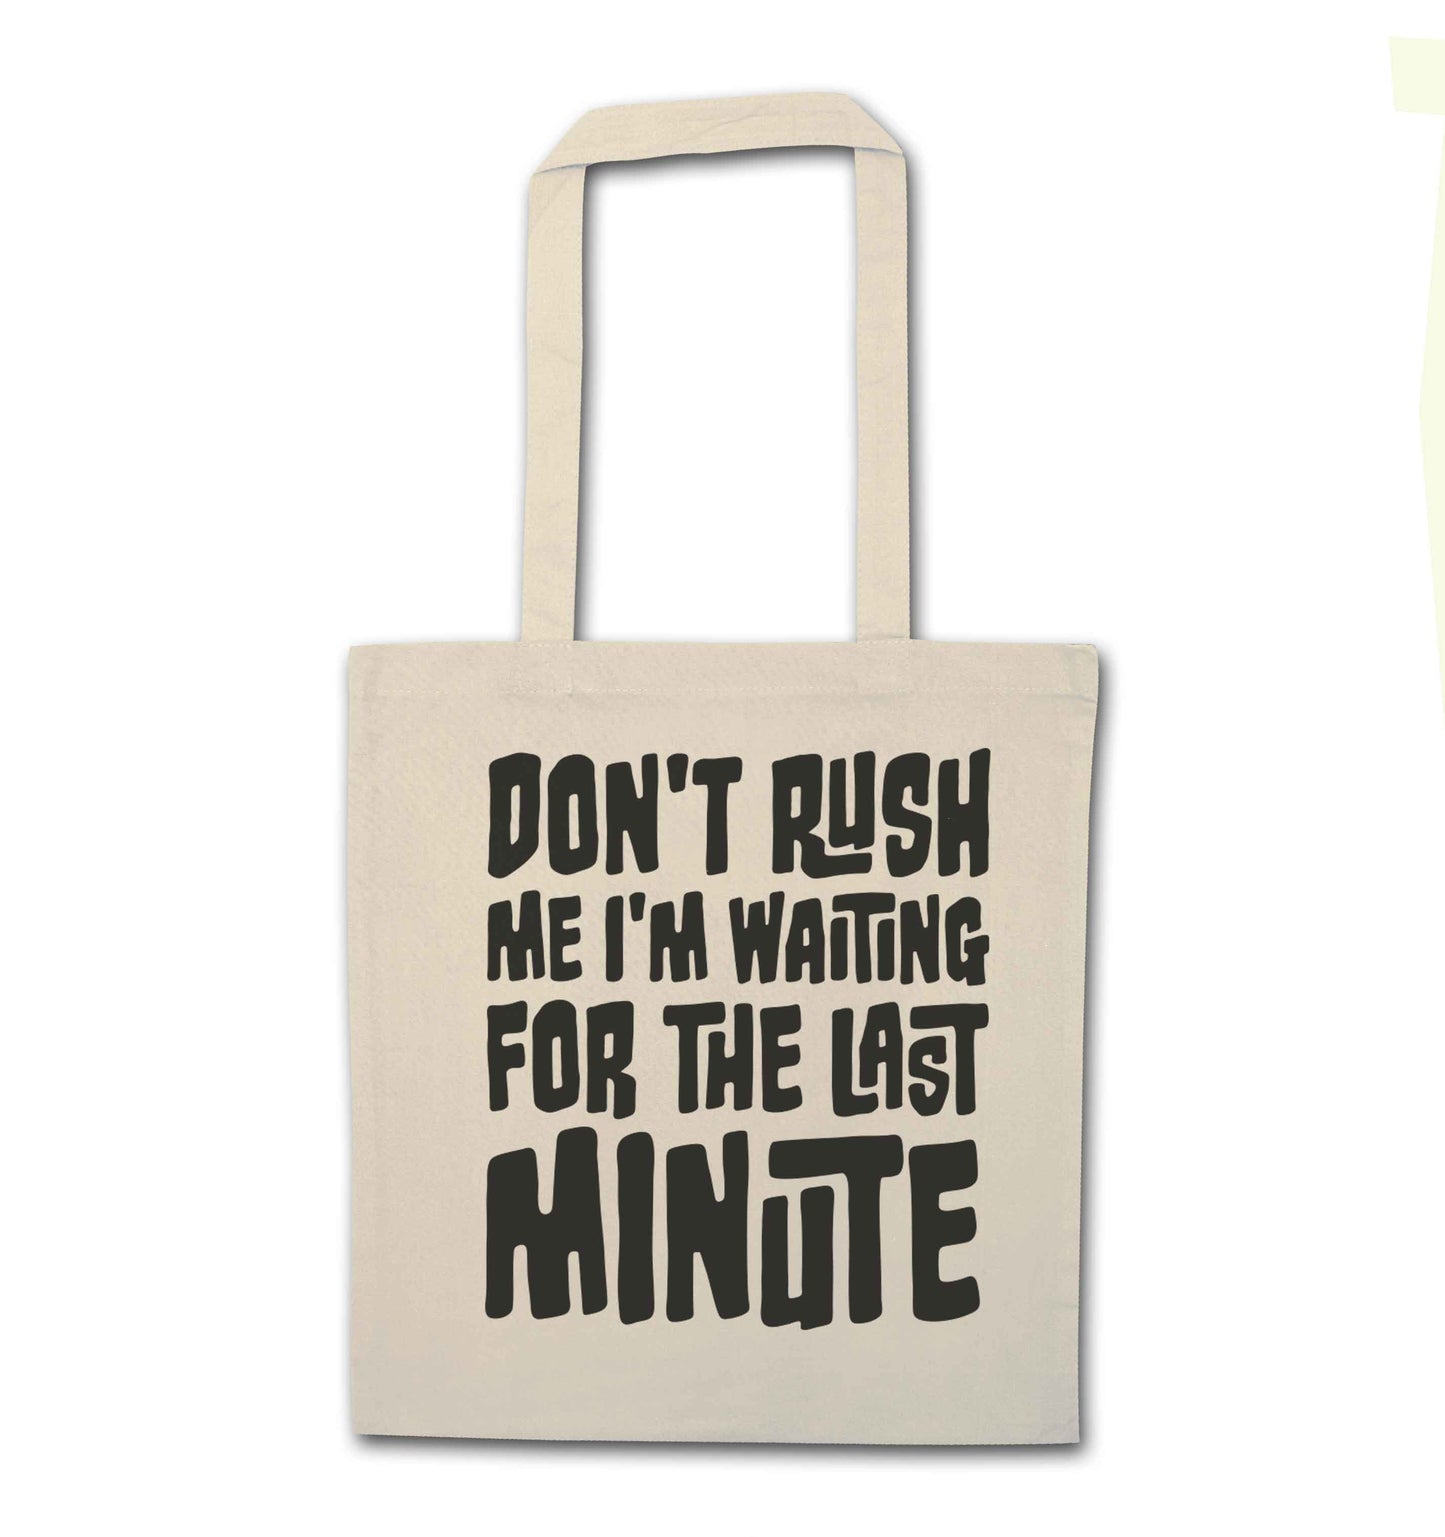 Don't rush me I'm waiting for the last minute natural tote bag